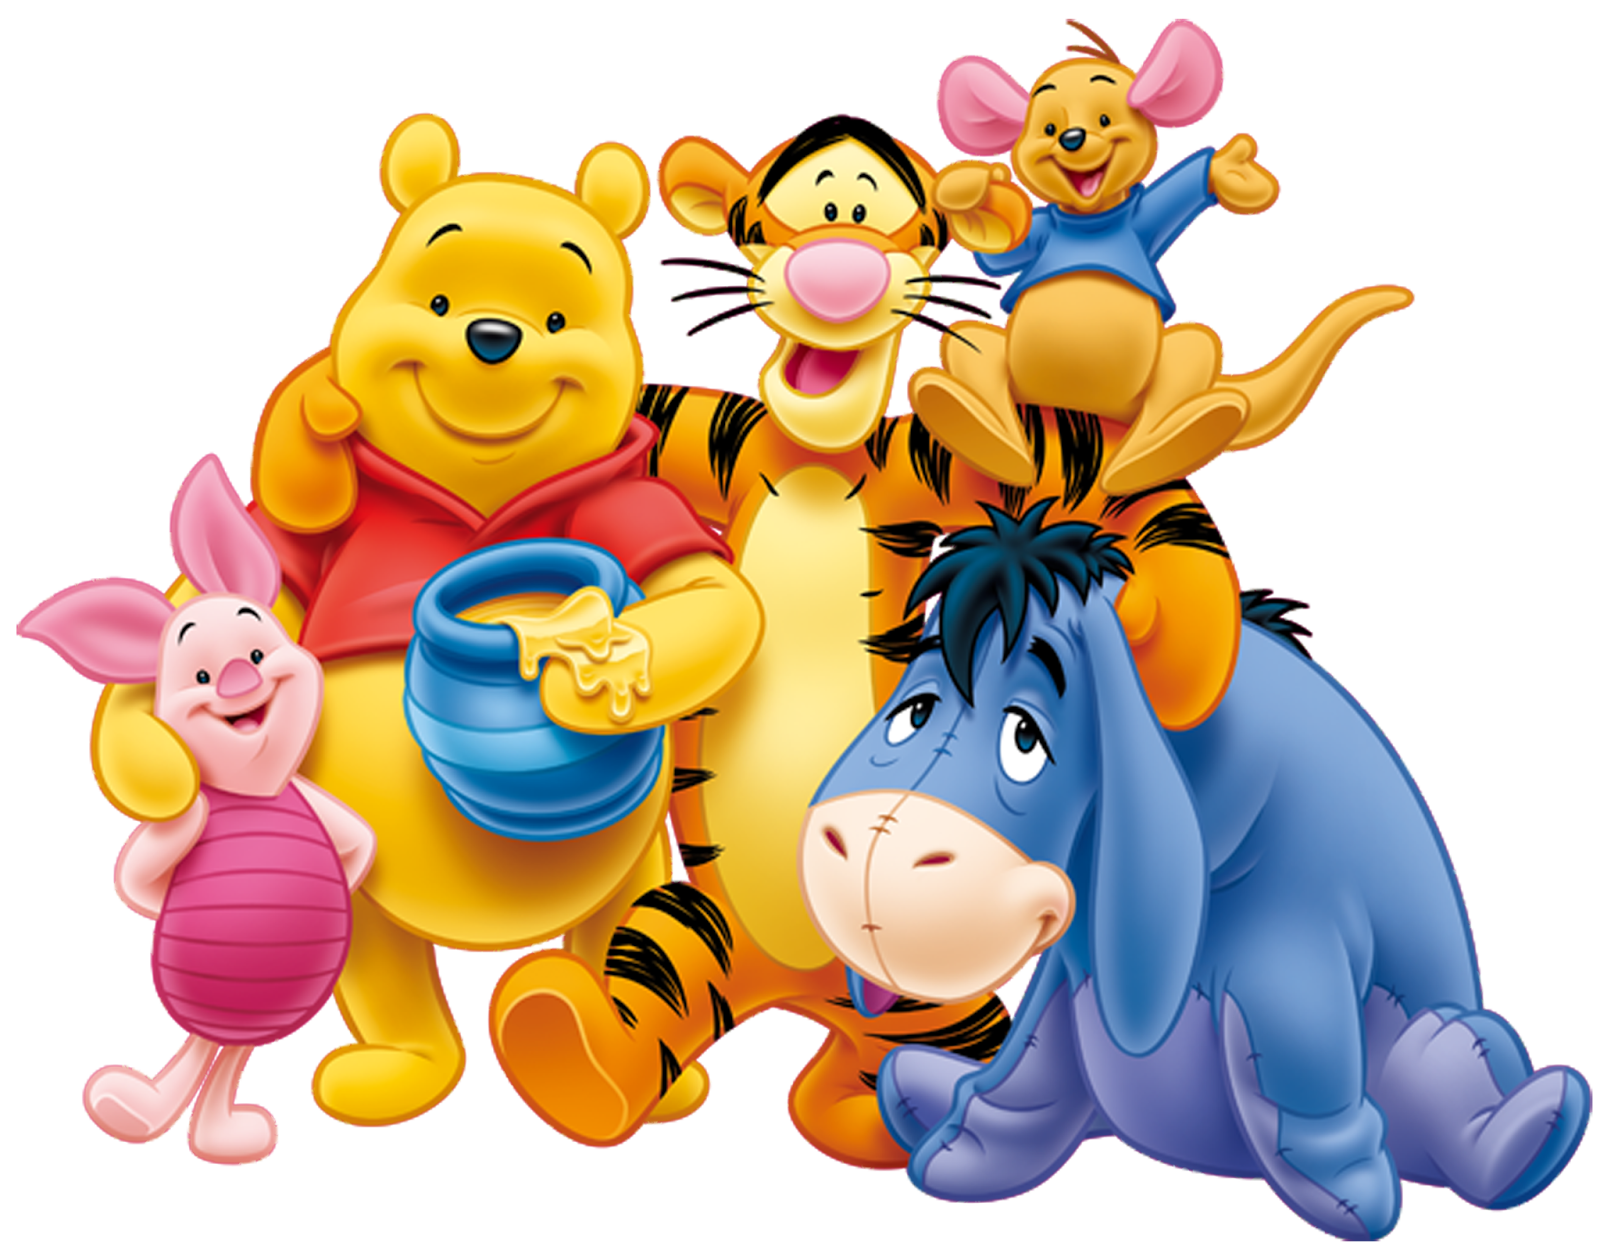 All the Winnie the Pooh characters in a group together.